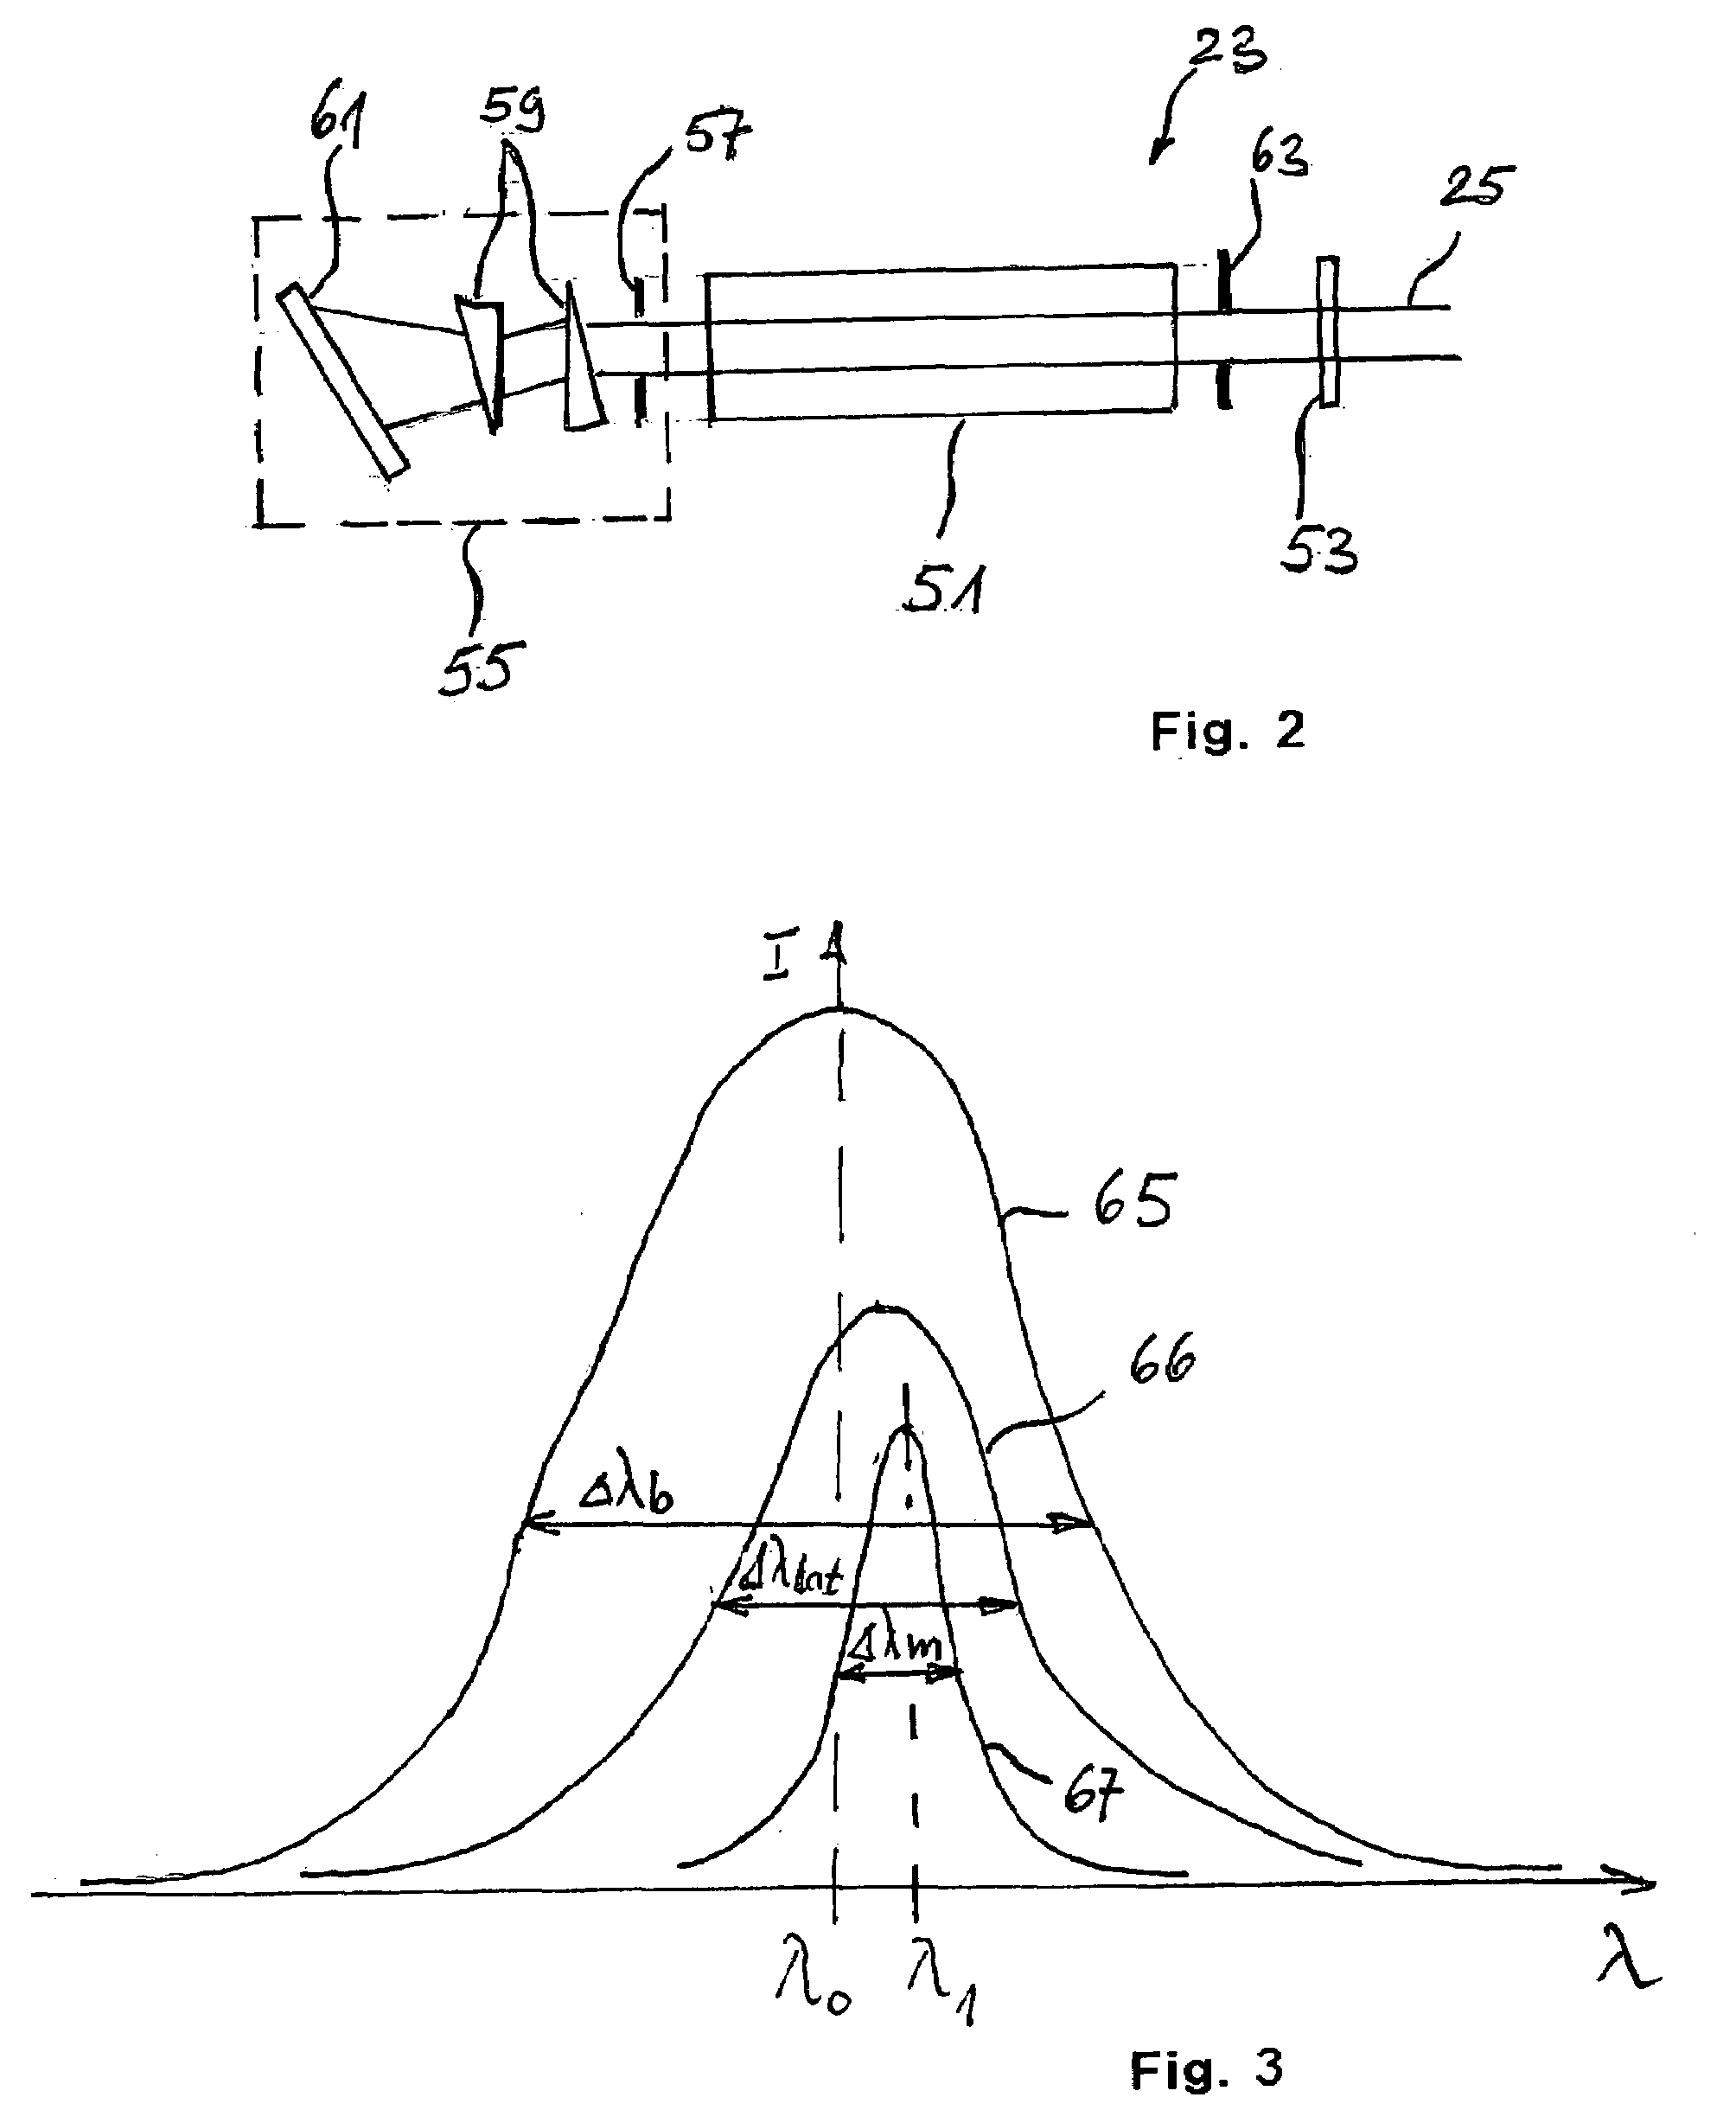 Projection Exposure System, Beam Delivery System and Method of Generating a Beam of Light